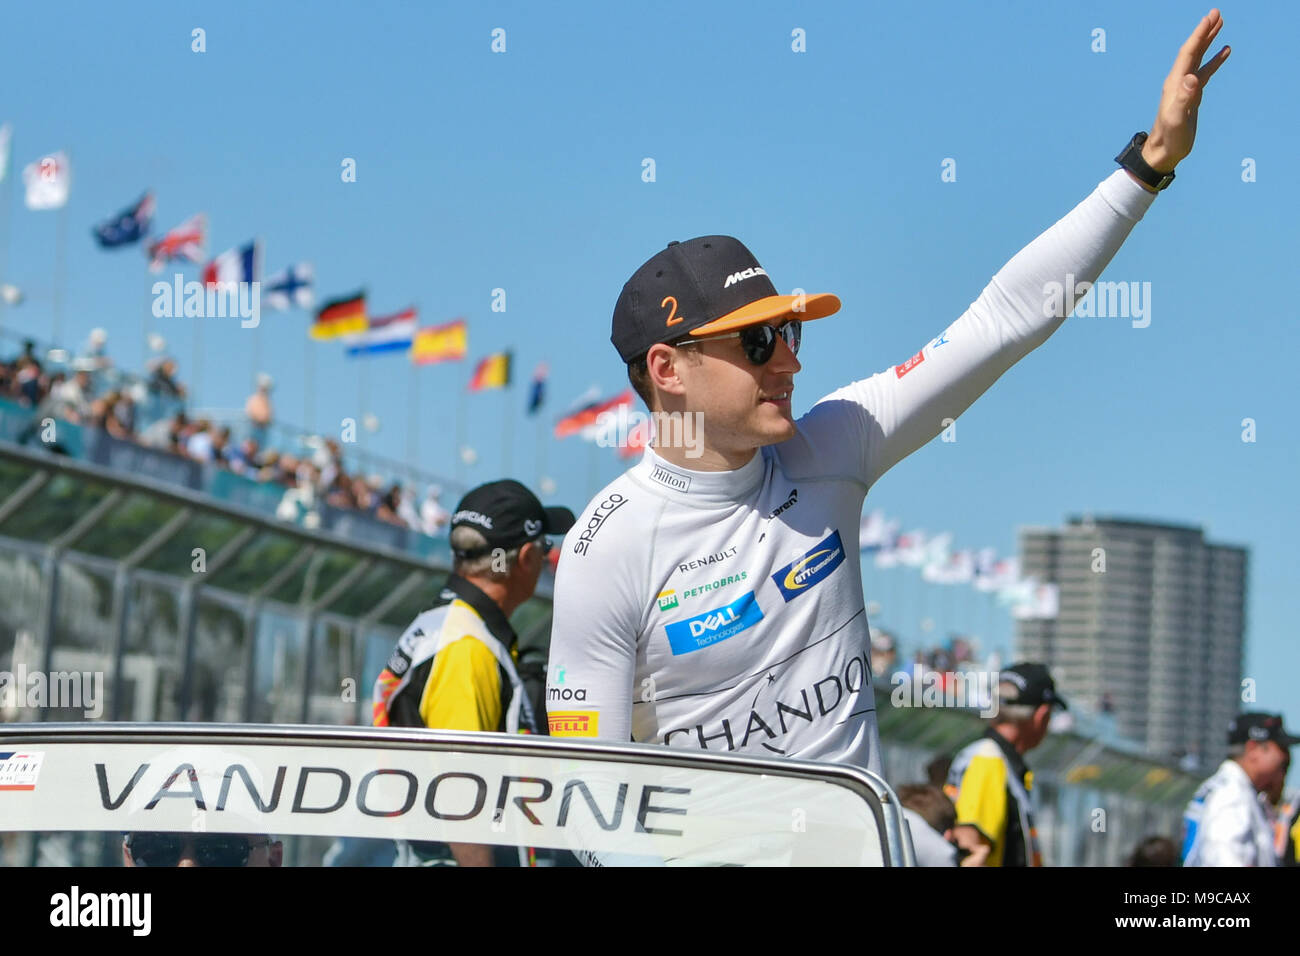 Albert Park, Melbourne, Australia. 25th Mar, 2018. Stoffell Vandoorne (BEL) #2 from the McLaren F1 team waves to the crowd during the drivers' parade at the 2018 Australian Formula One Grand Prix at Albert Park, Melbourne, Australia. Sydney Low/Cal Sport Media/Alamy Live News Stock Photo